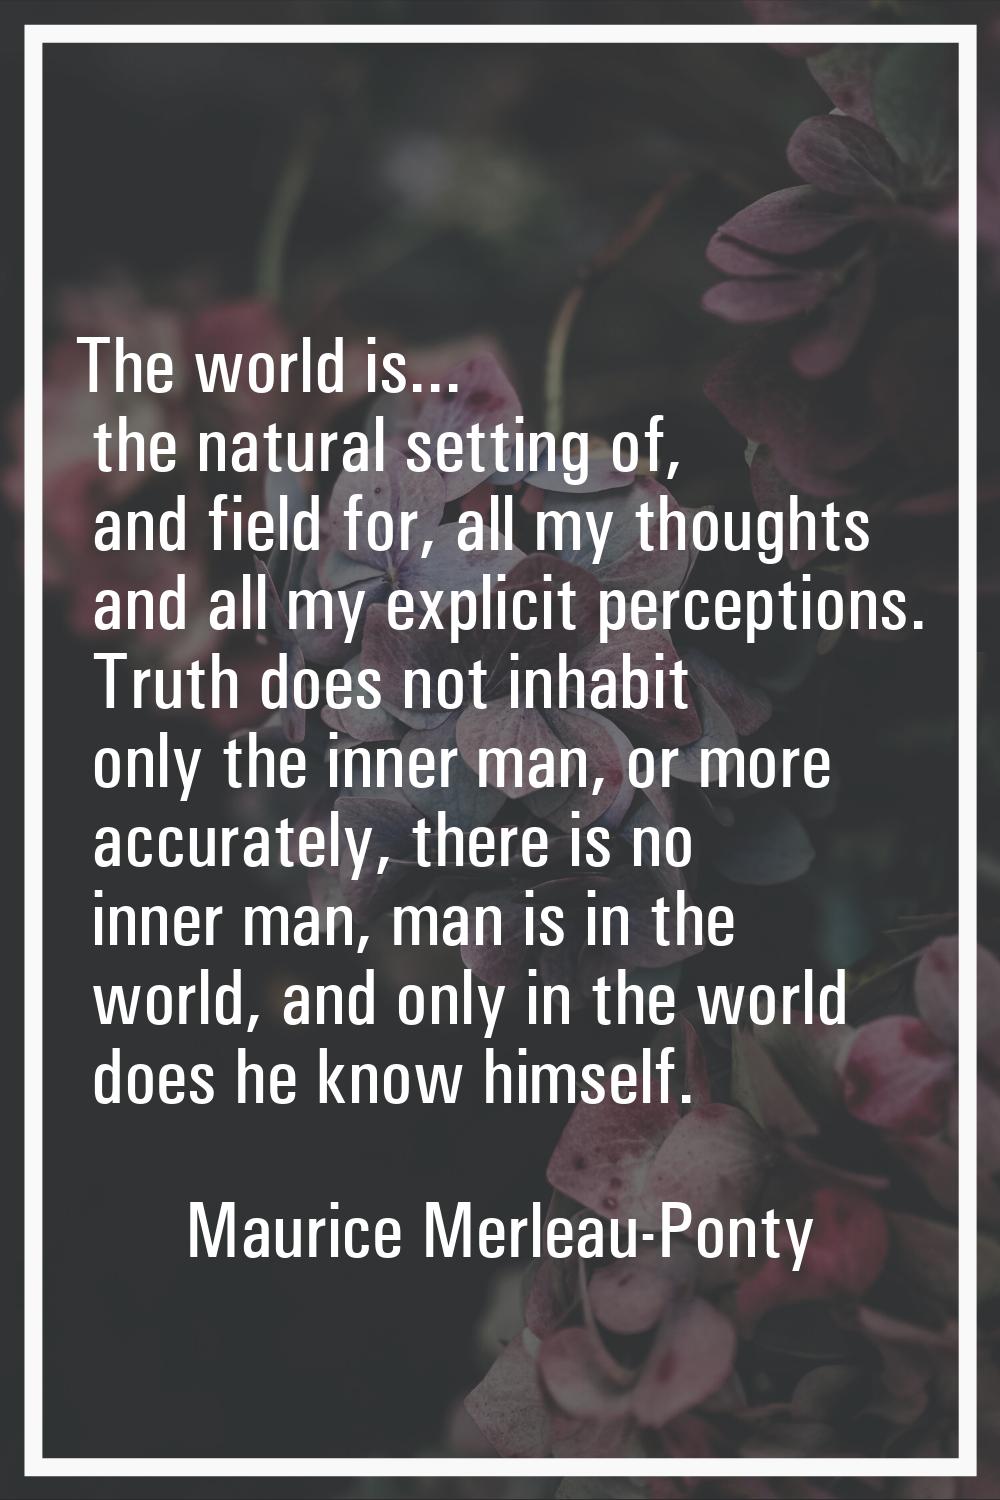 The world is... the natural setting of, and field for, all my thoughts and all my explicit percepti